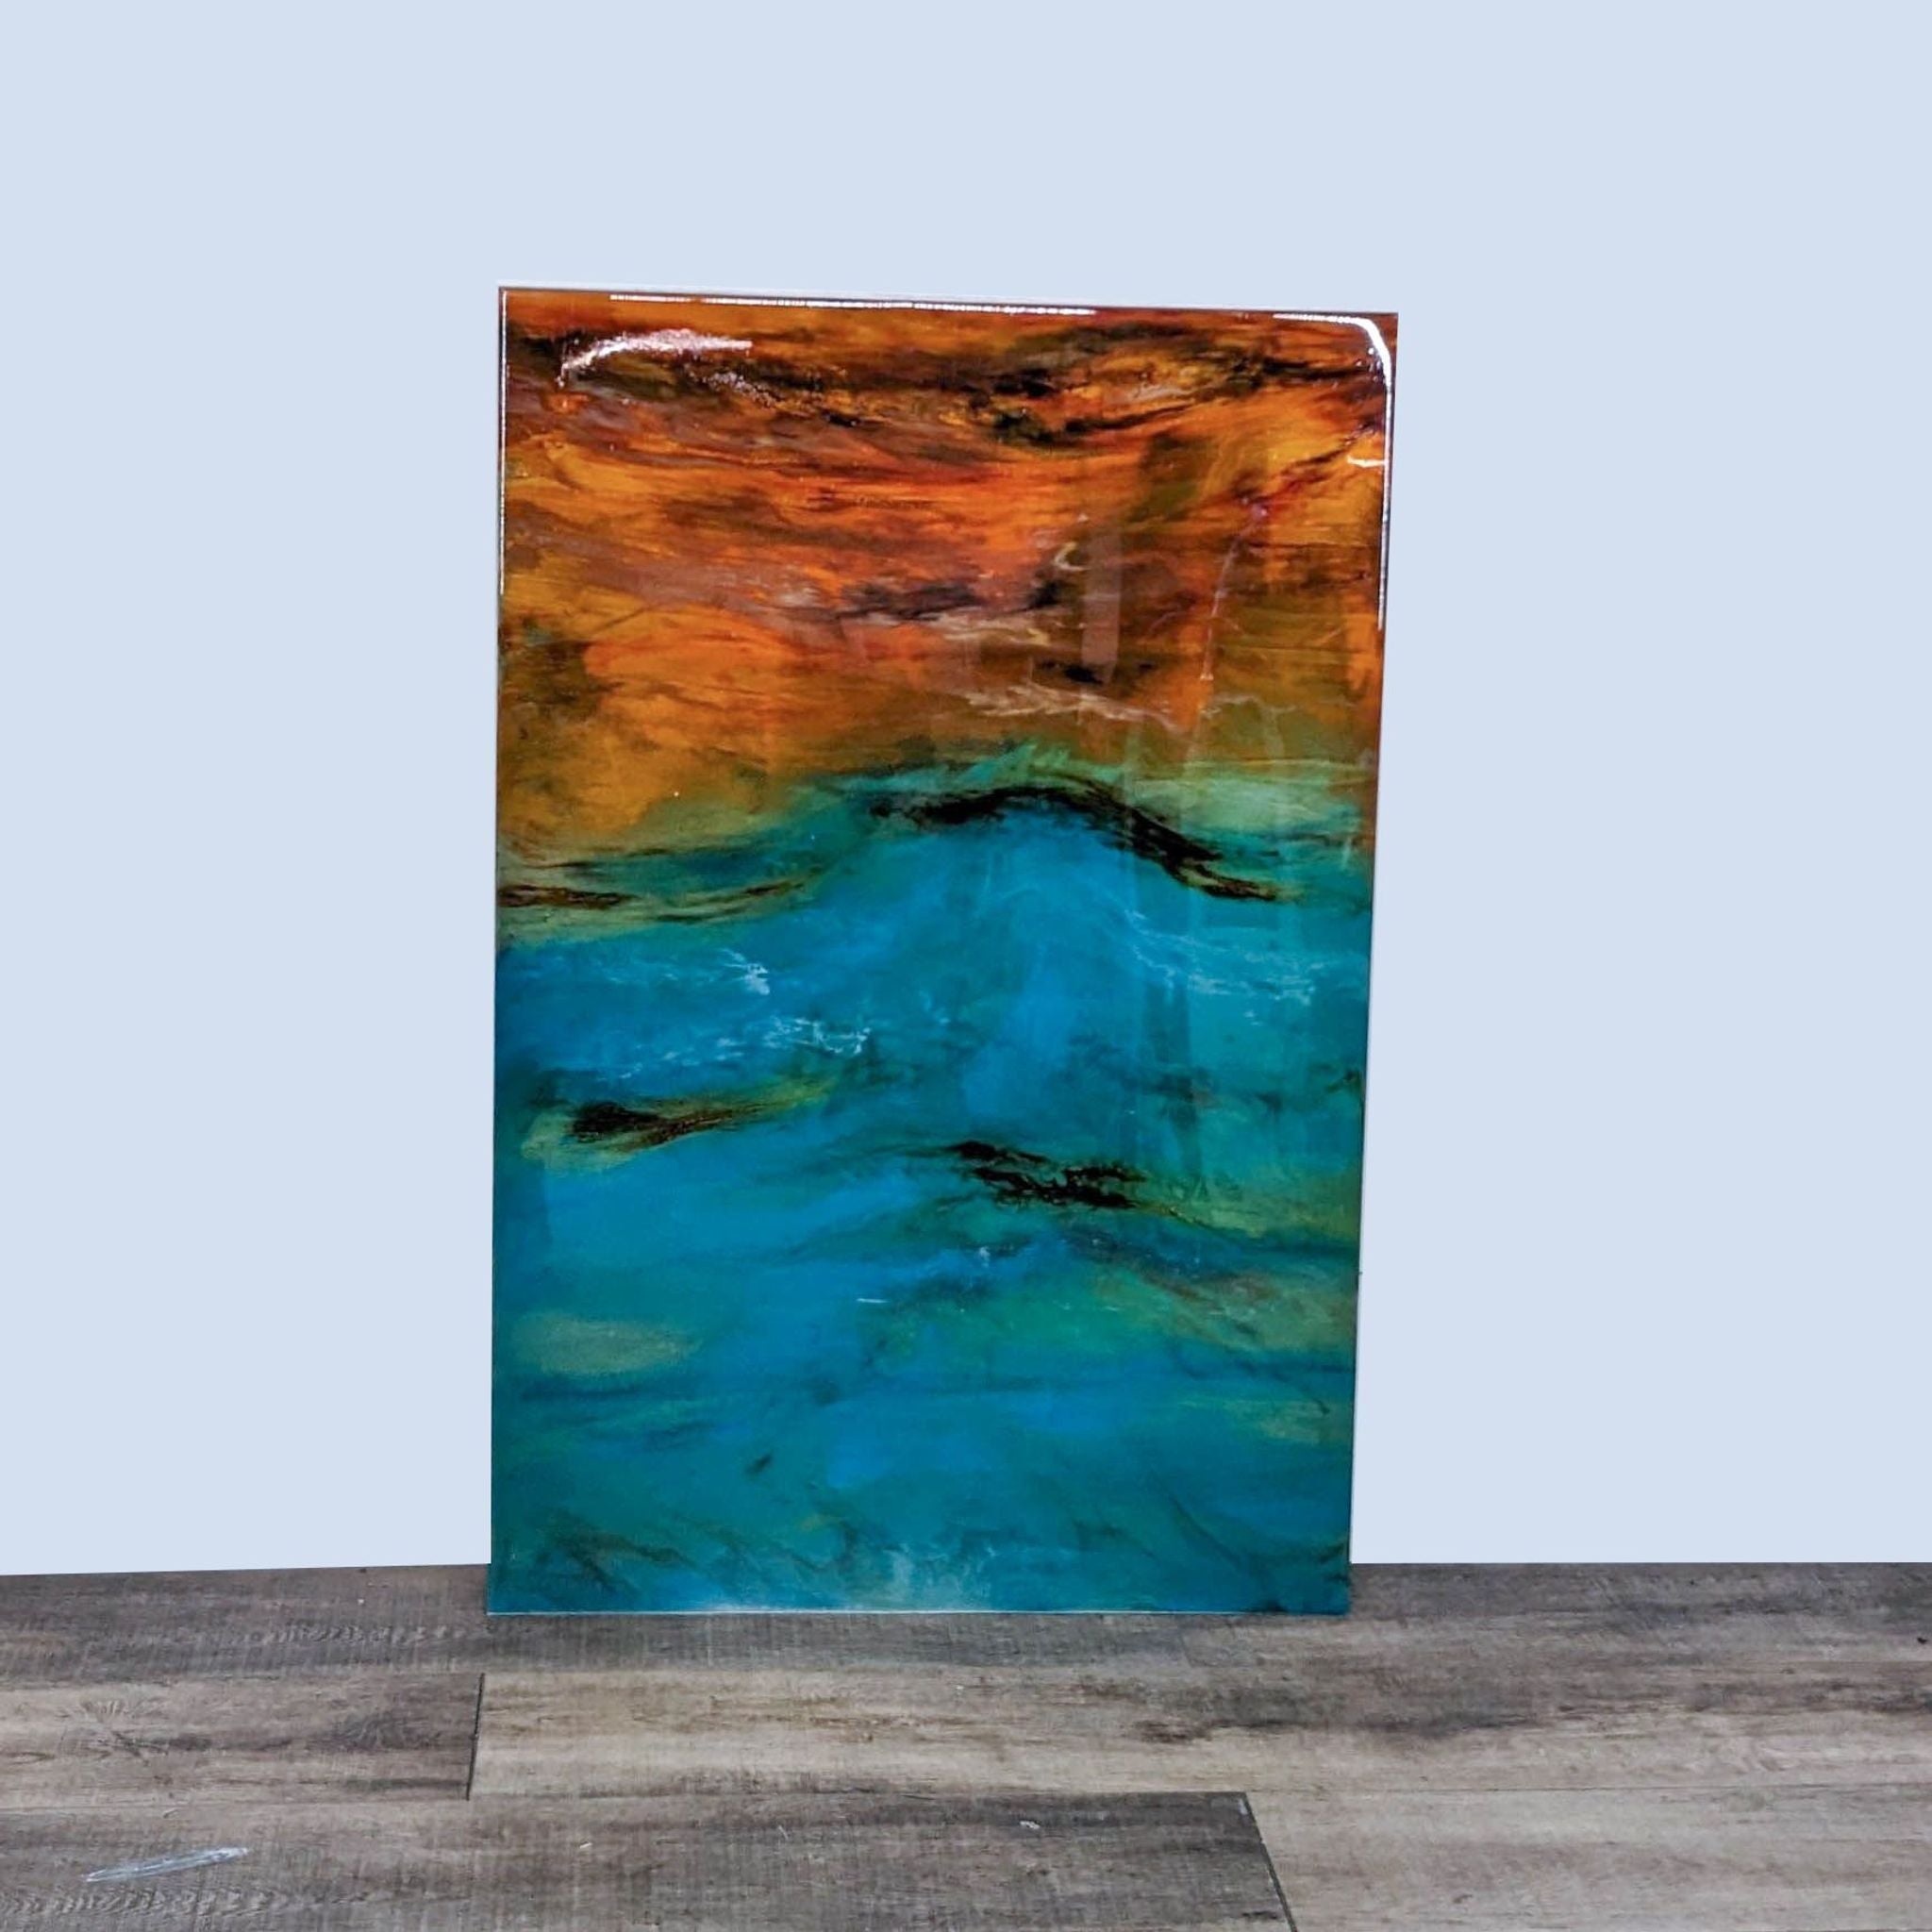 1. Abstract resin on steel artwork by Christo Braun, vibrant blue and warm tones resembling water and earth textures.